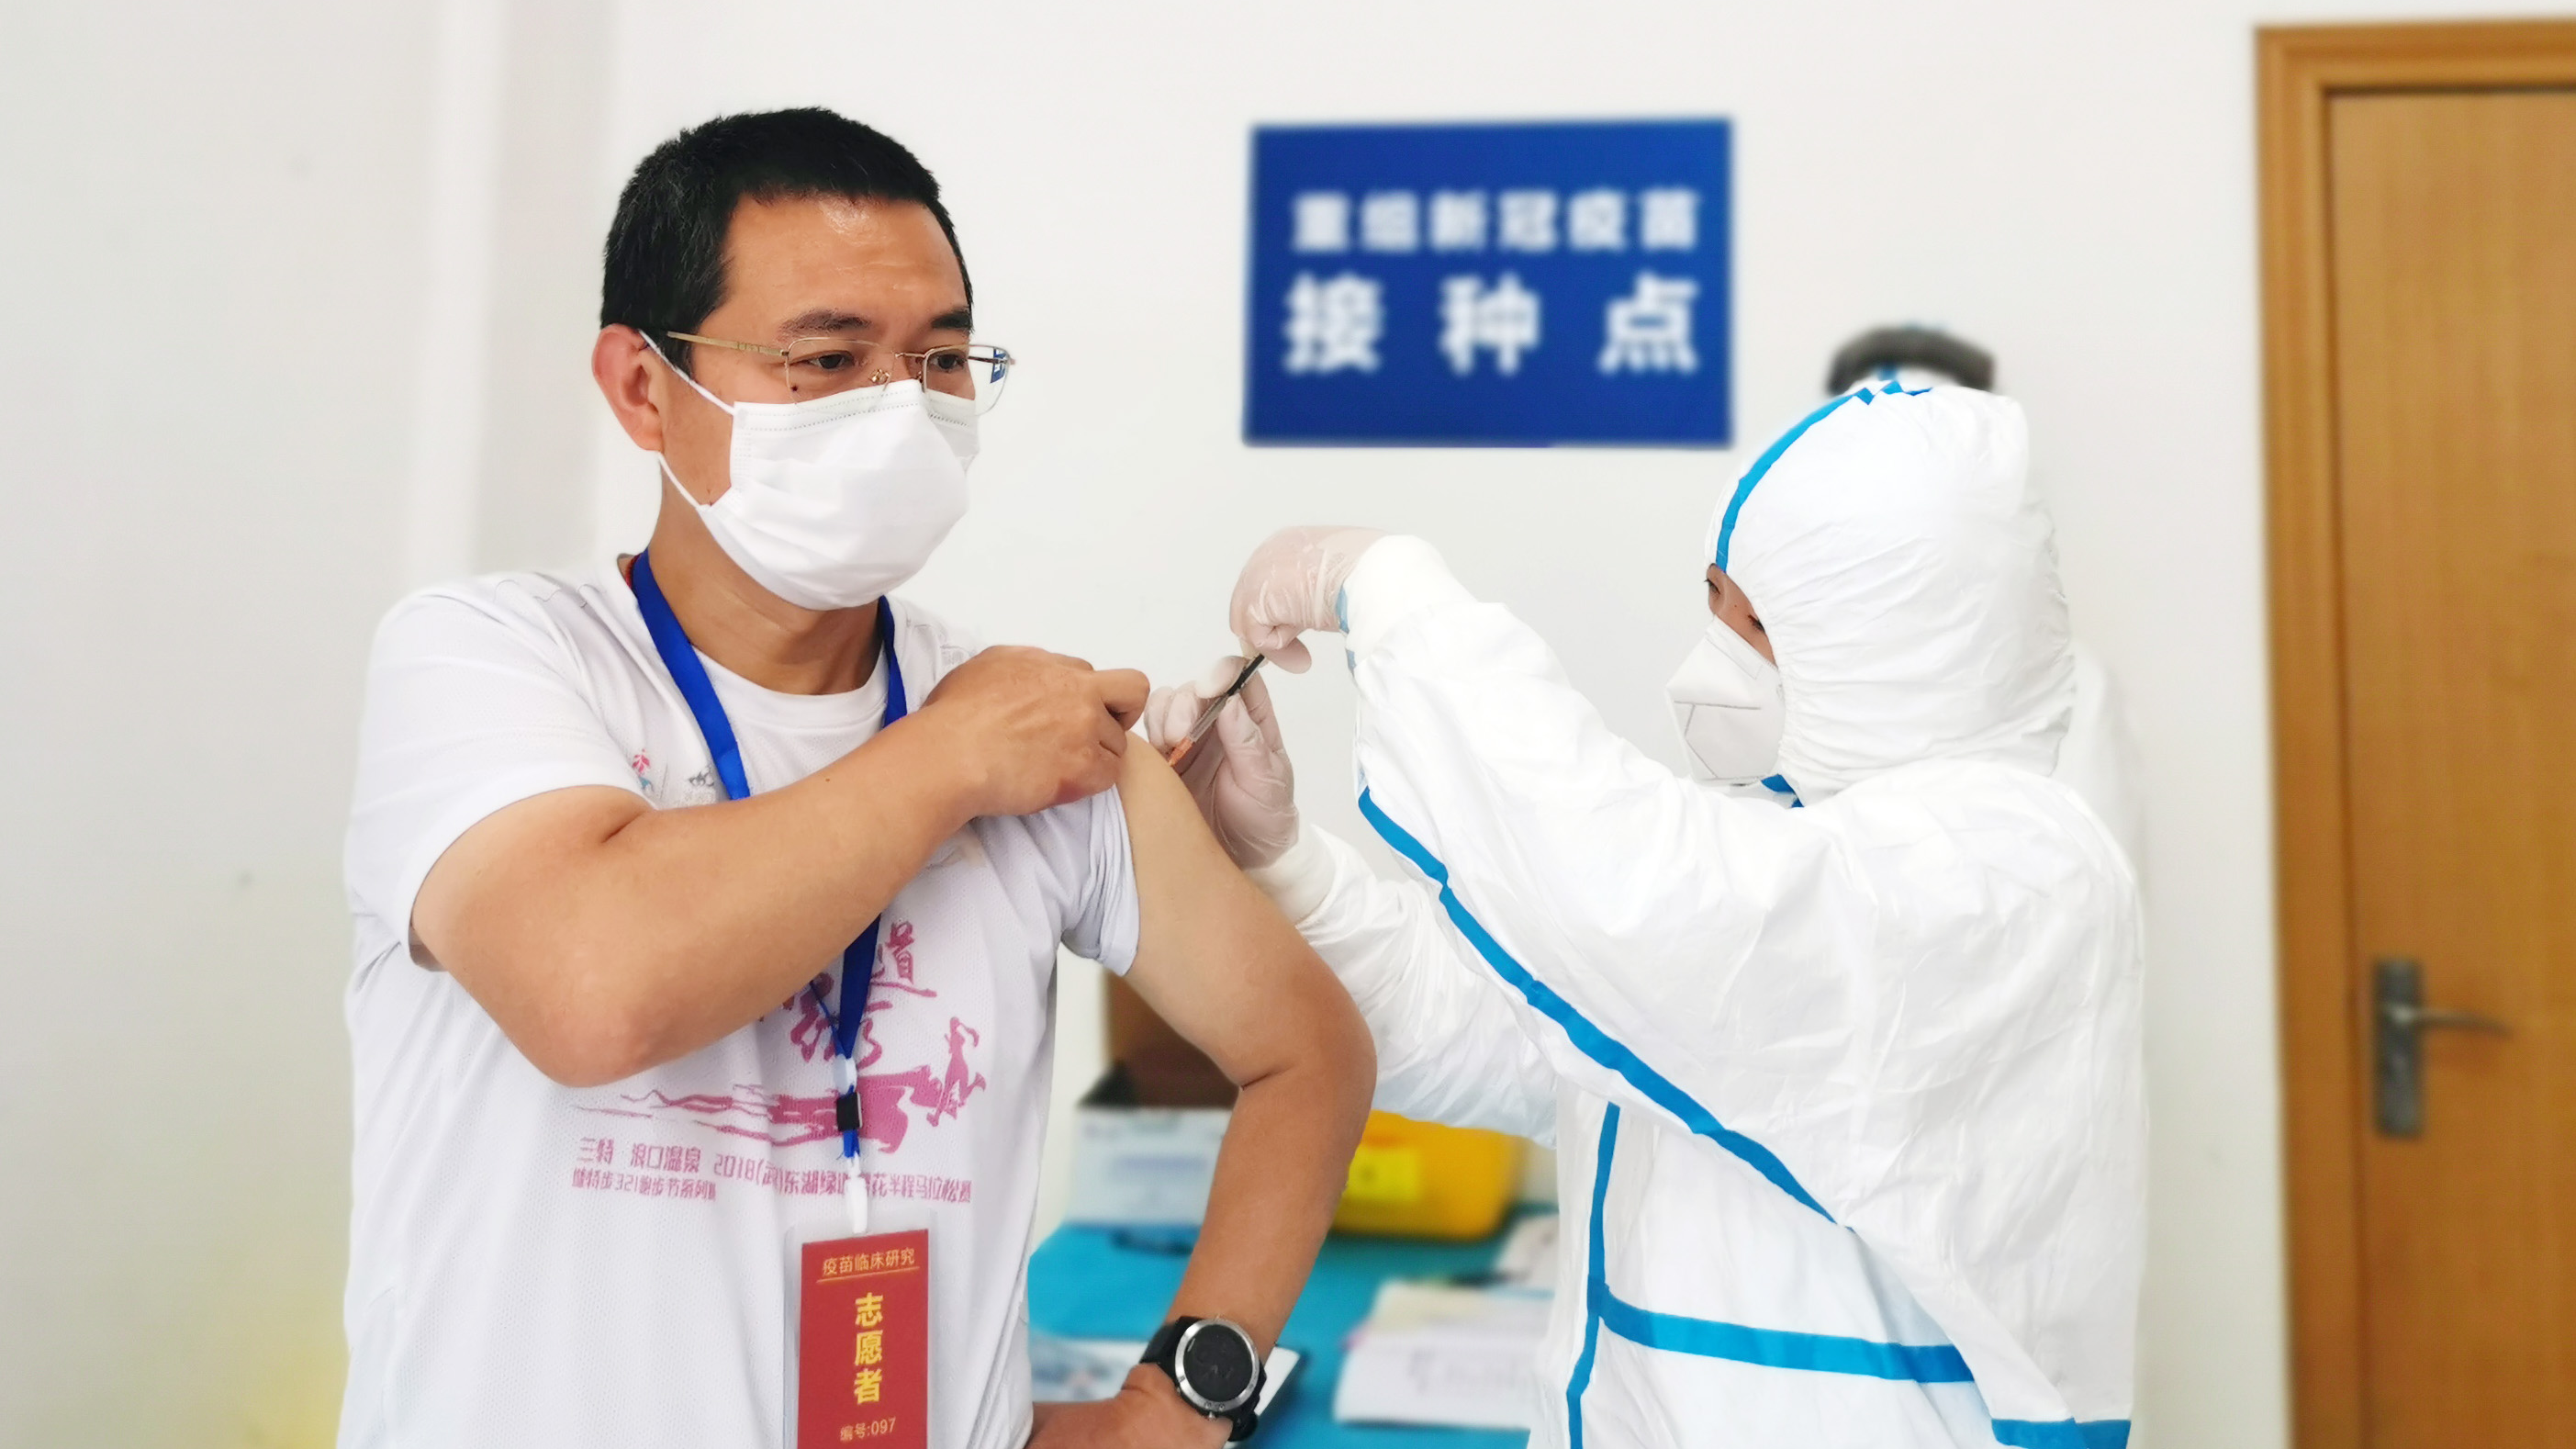 A volunteer receives an adenovirus vector vaccine injection in Wuhan, central China's Hubei Province, April 12, 2020. /Xinhua